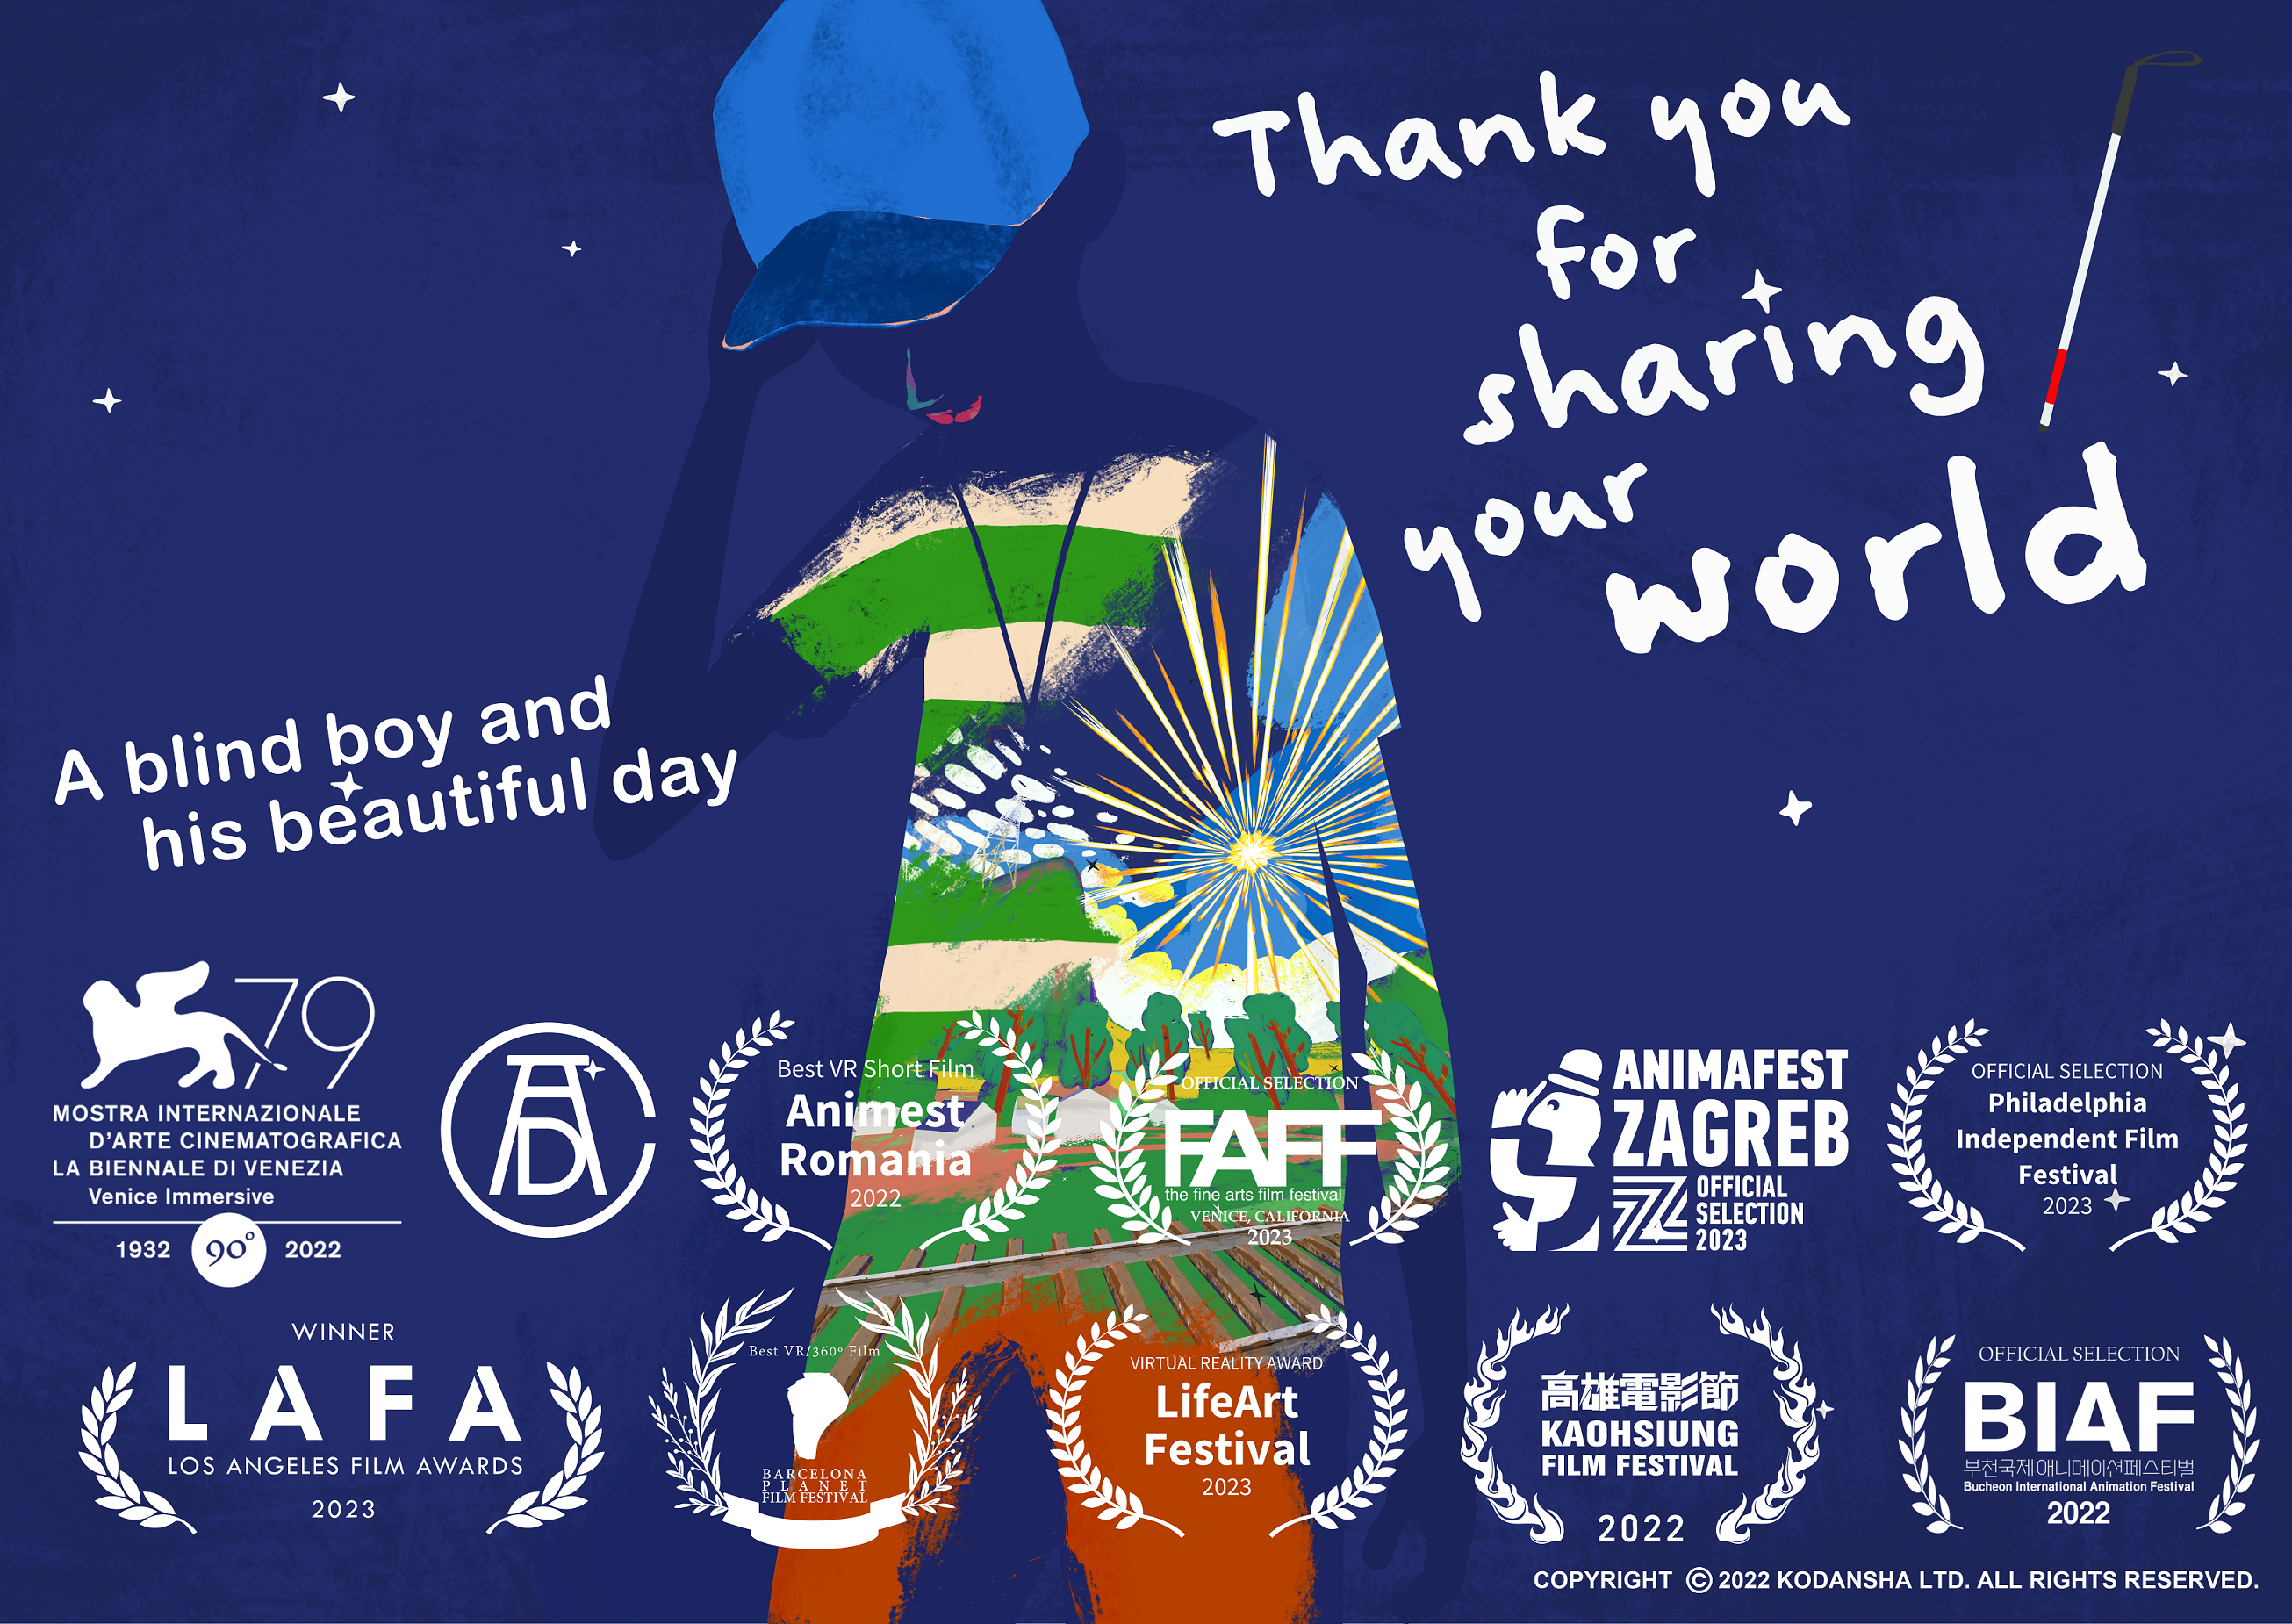 VR Film - Thank you for sharing your world